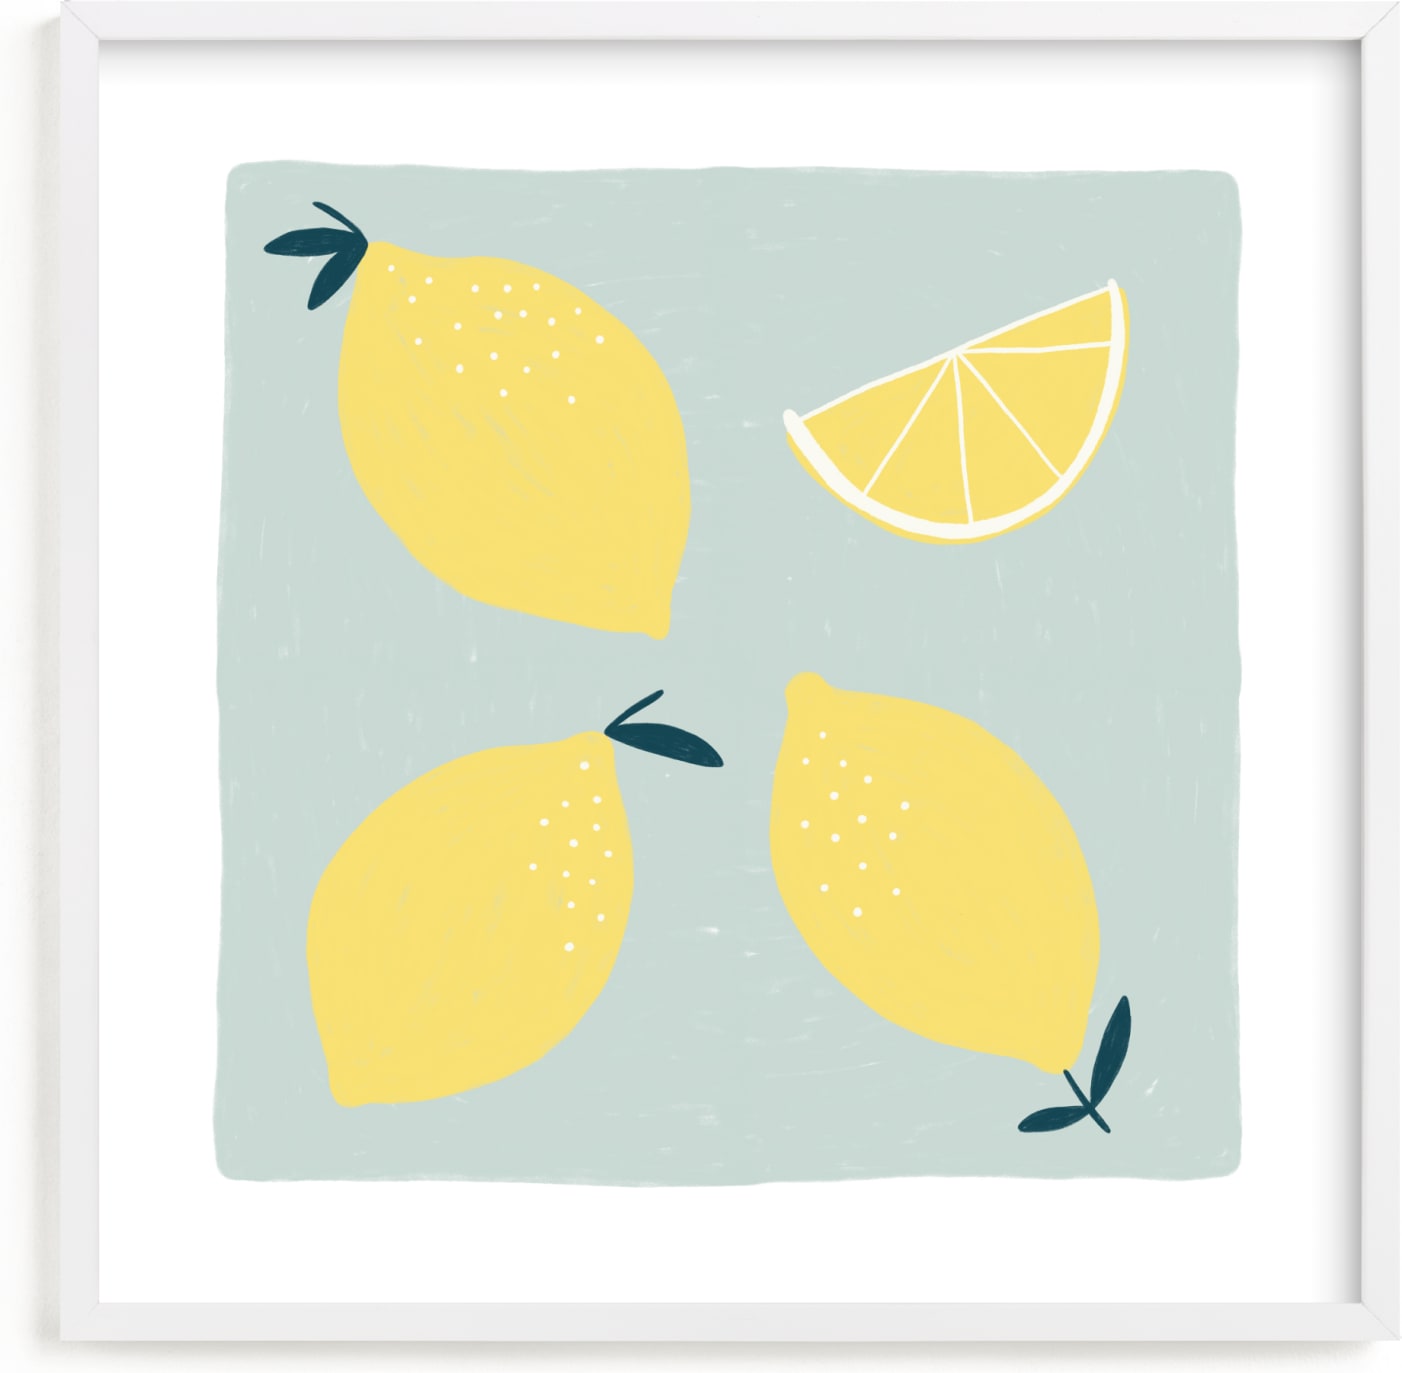 This is a yellow kids wall art by Betsy Siber called Lemon Wedge.